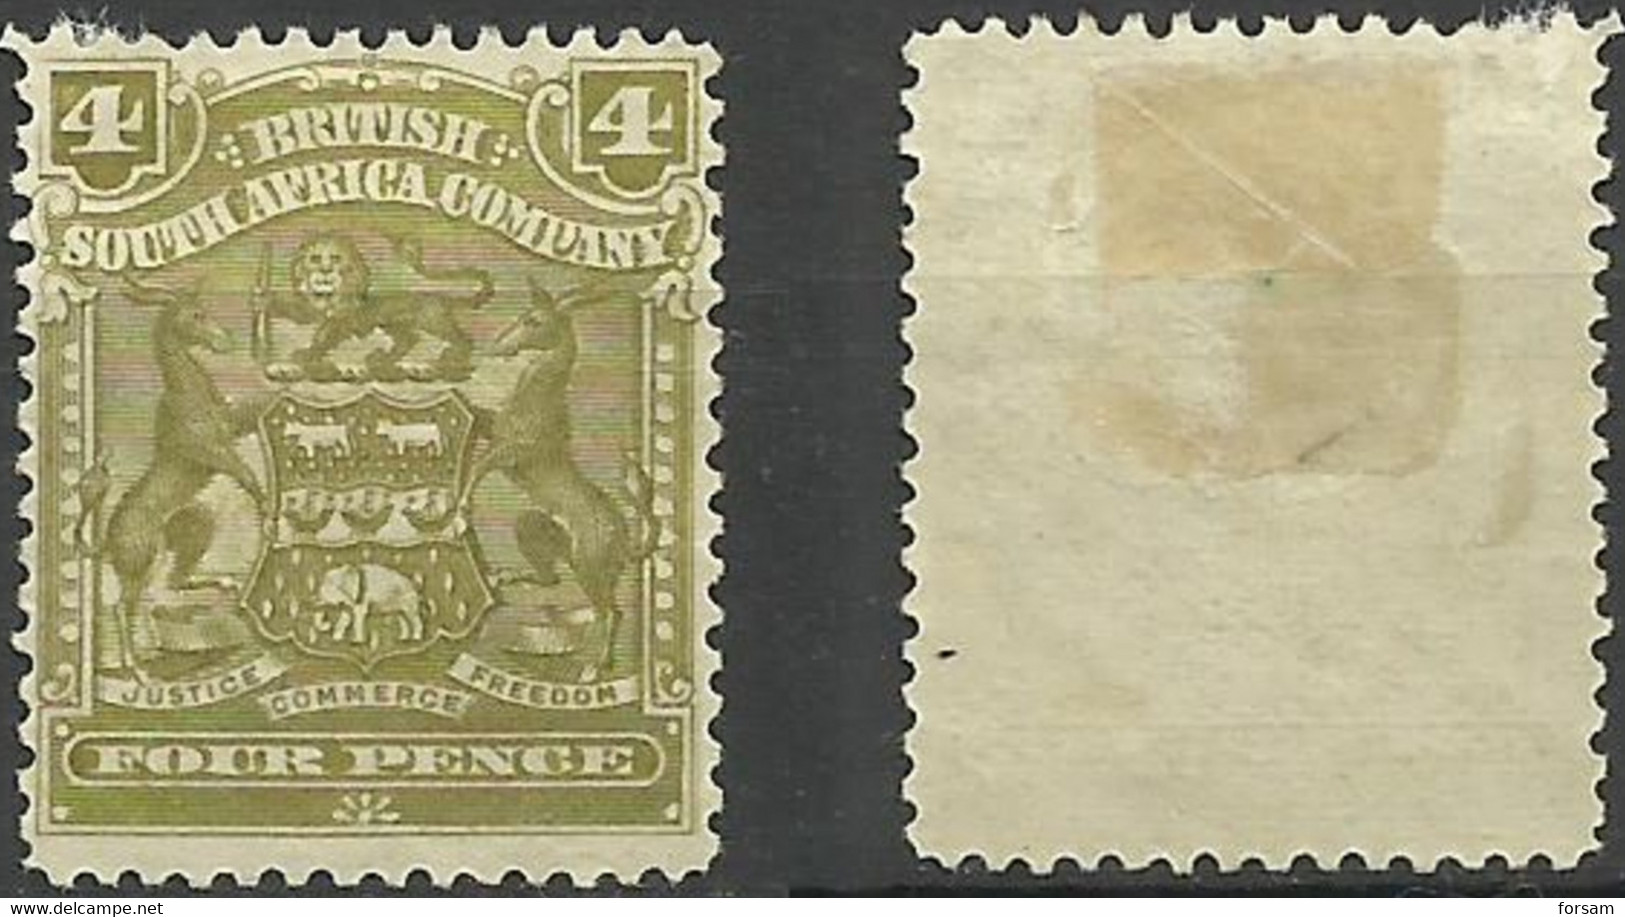 SOUTH AFRICA..1898..Michel # 63...MH...MiCV - 12 Euro. - Unclassified